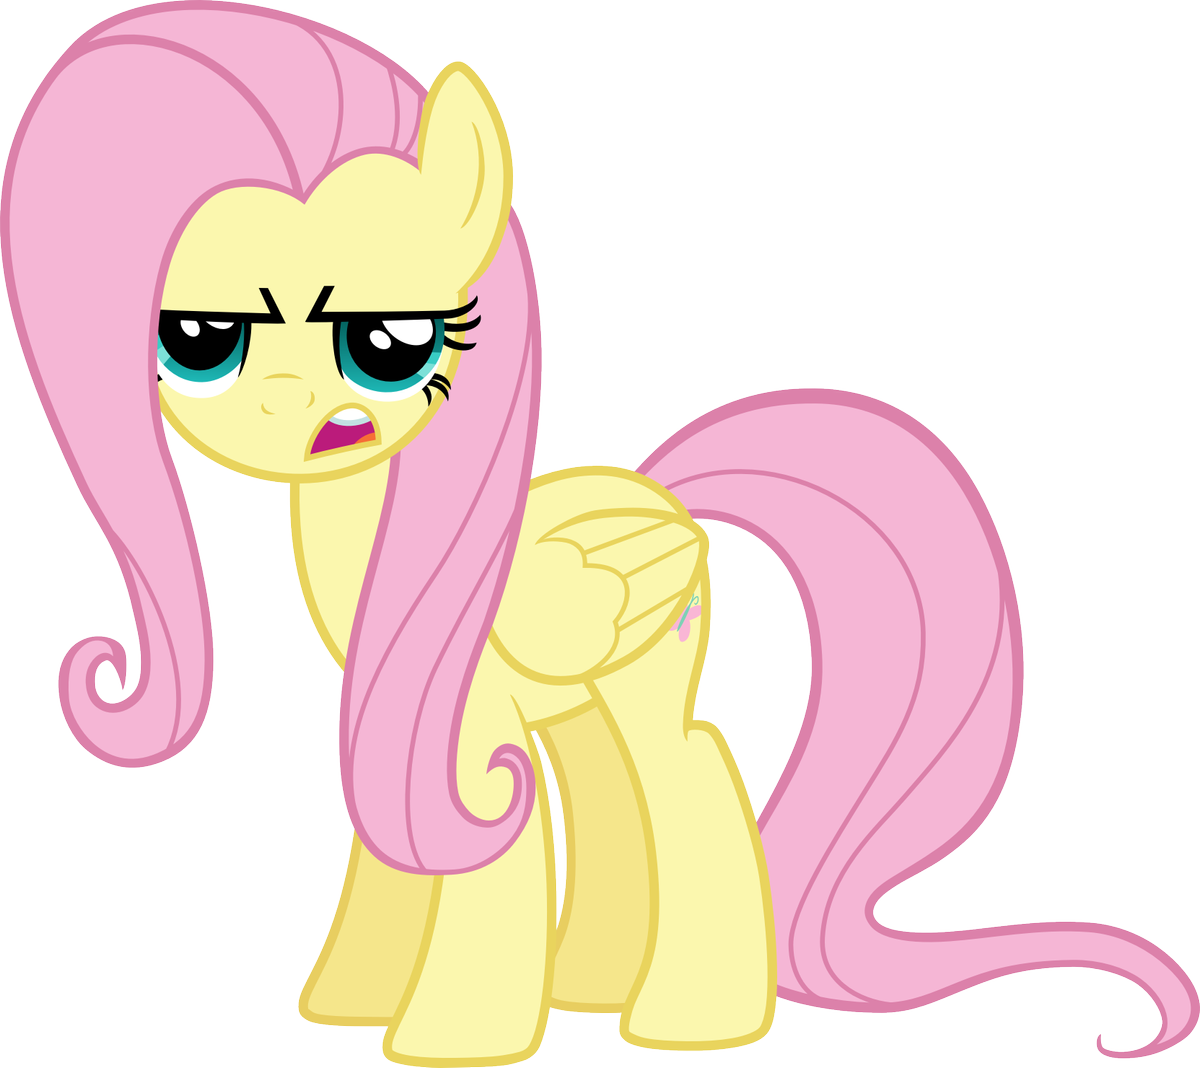 fluttershy is serious by crunchnugget-d4